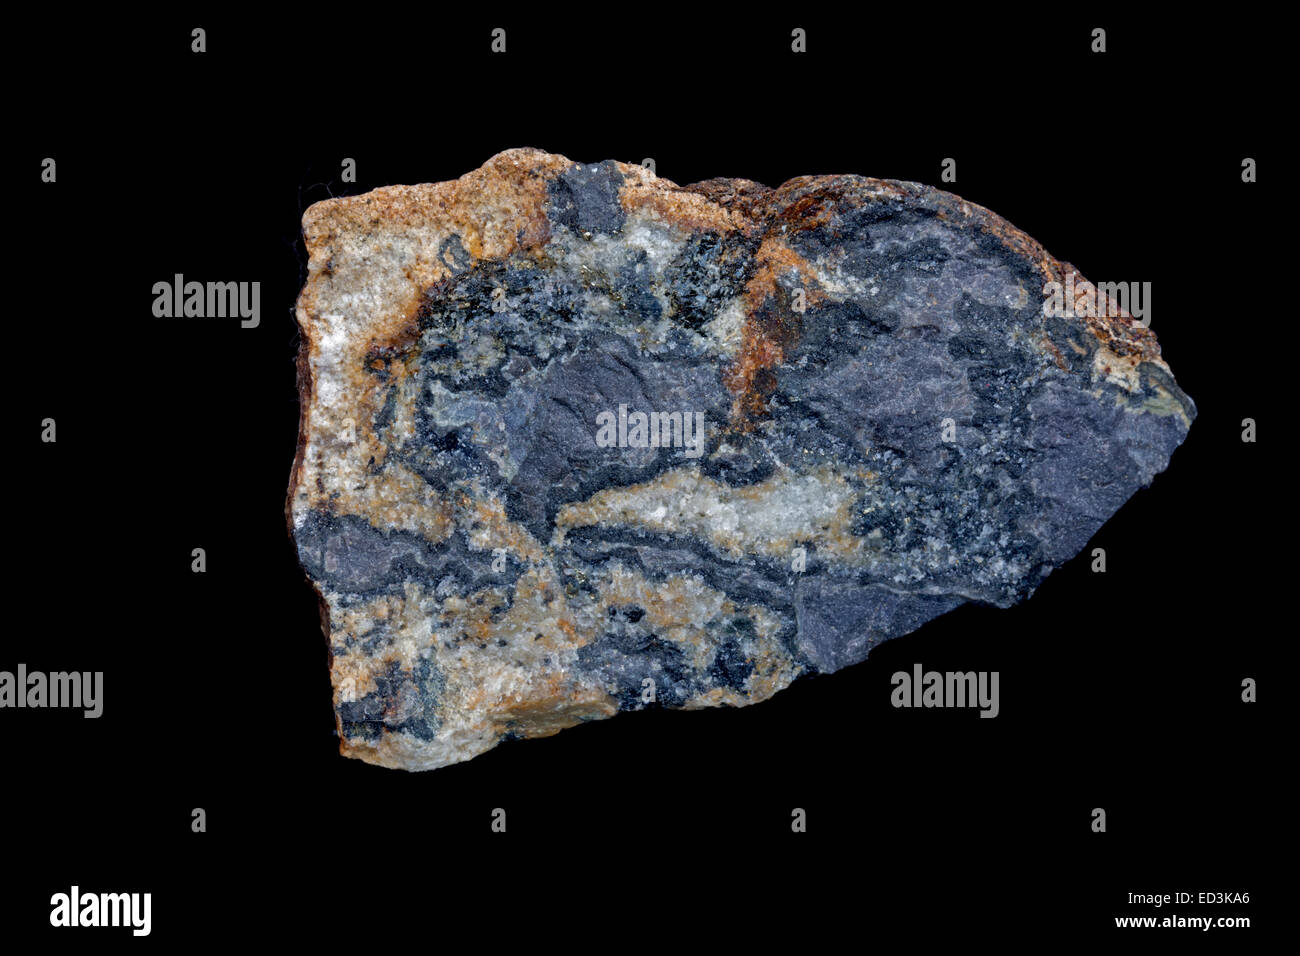 fluorobritholite, surrounded by allanite, Rare earth element bearing minerals, Colorado Stock Photo